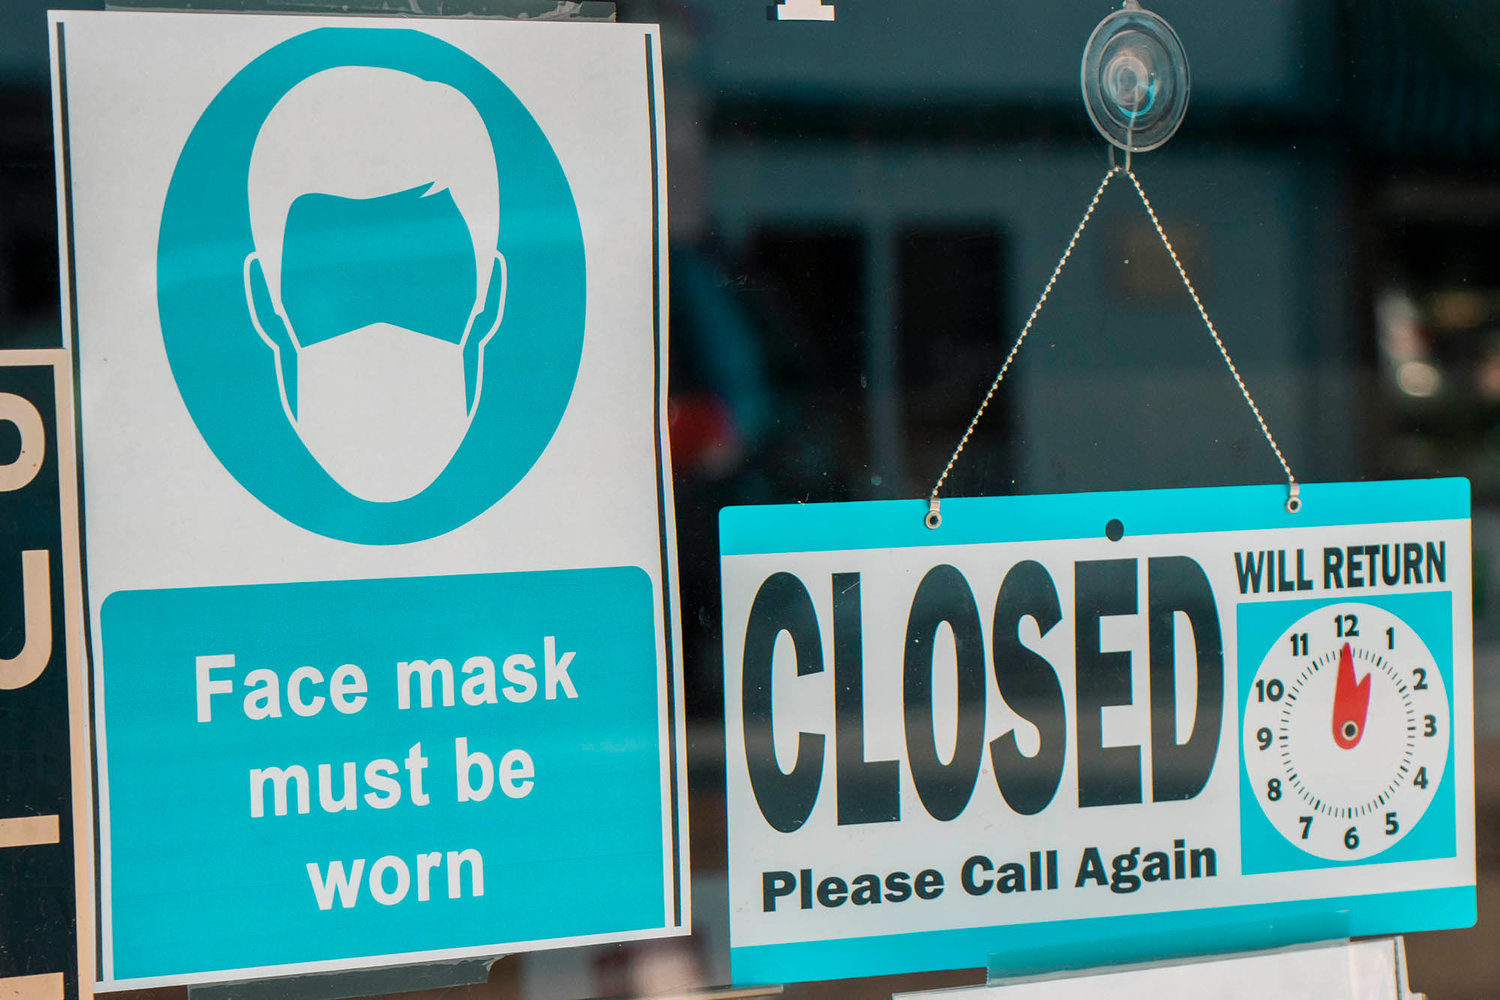 A sign requiring face masks before entering hangs on display next to a ‘closed’ sign last June in Chehalis.